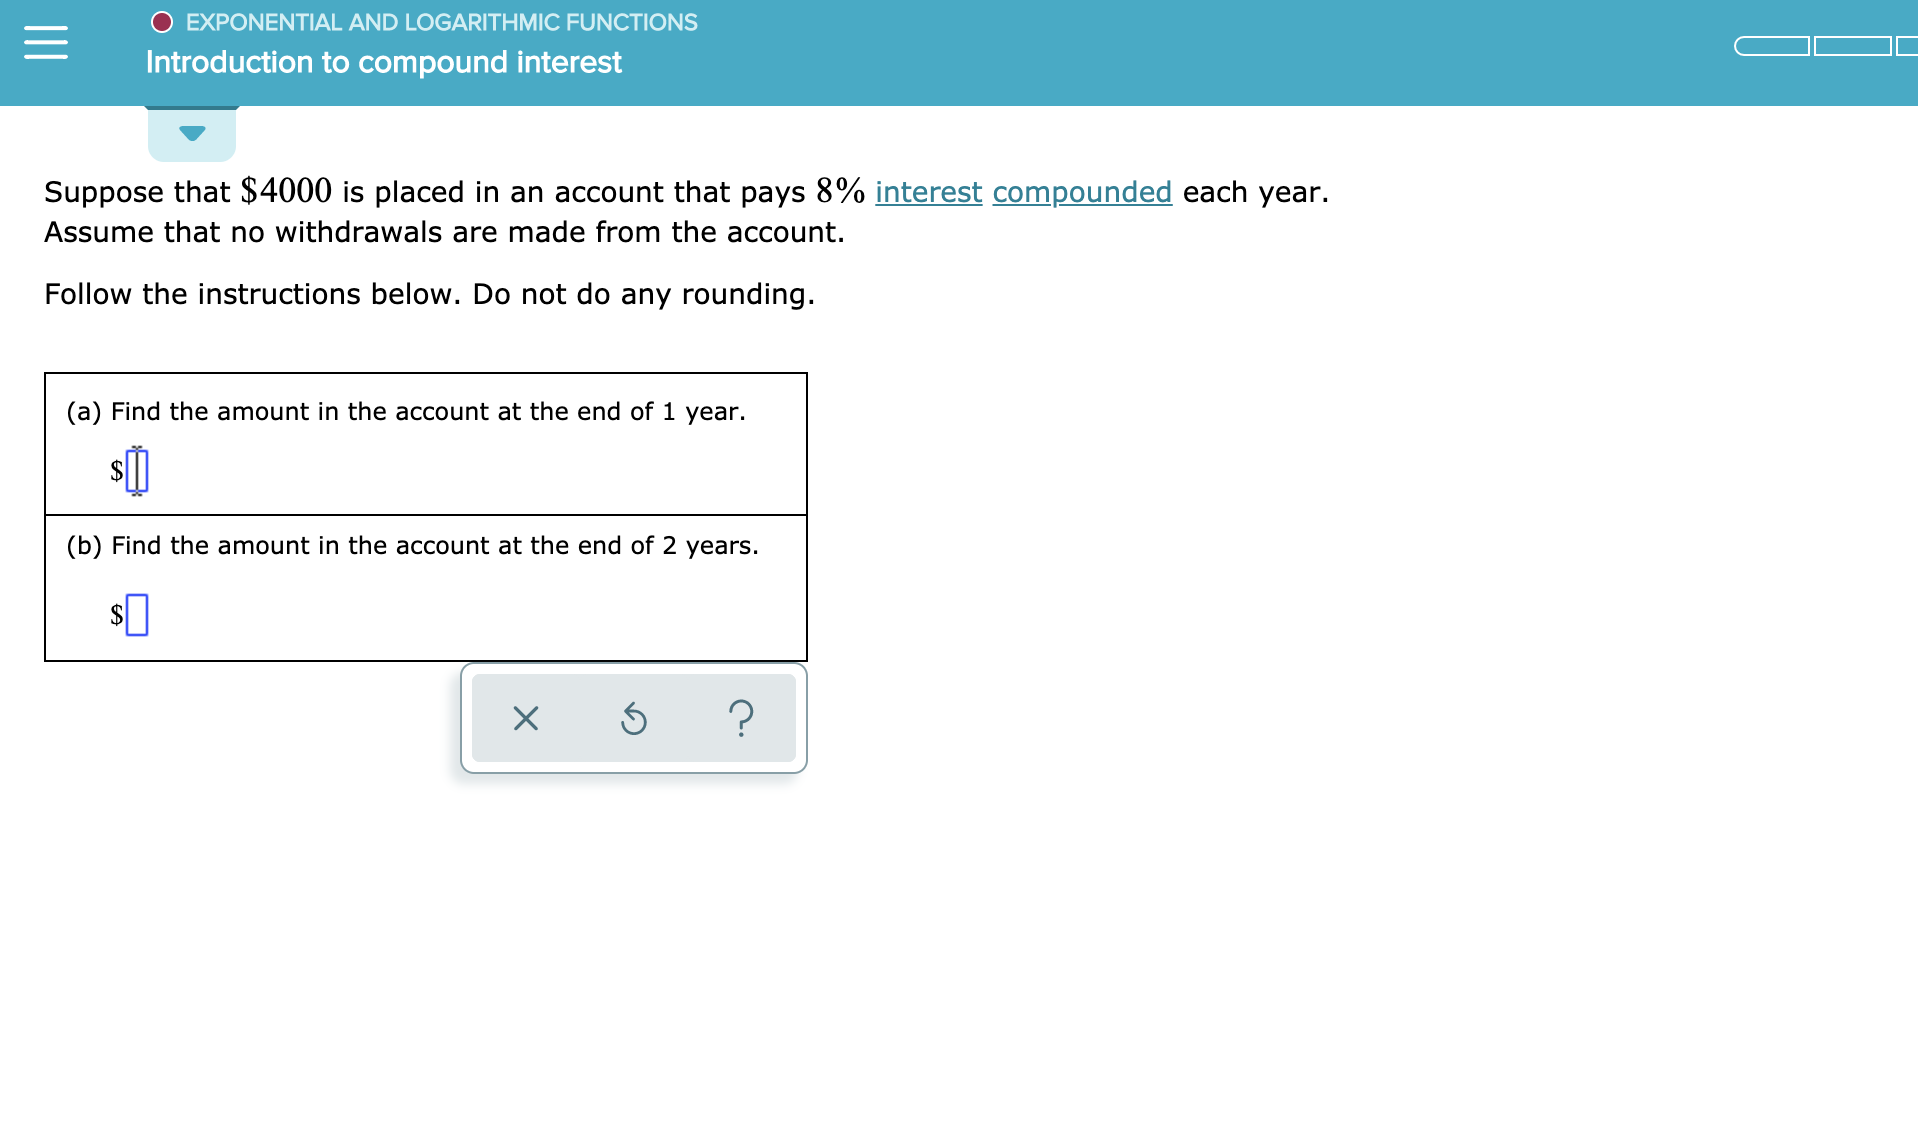 EXPONENTIAL AND LOGARITHMIC FUNCTIONS
Introduction to compound interest
Suppose that $4000 is placed in an account that pays 8% interest compounded each year.
Assume that no withdrawals are made from the account.
Follow the instructions below. Do not do any rounding.
(a) Find the amount in the account at the end of 1 year.
(b) Find the amount in the account at the end of 2 years.
?
